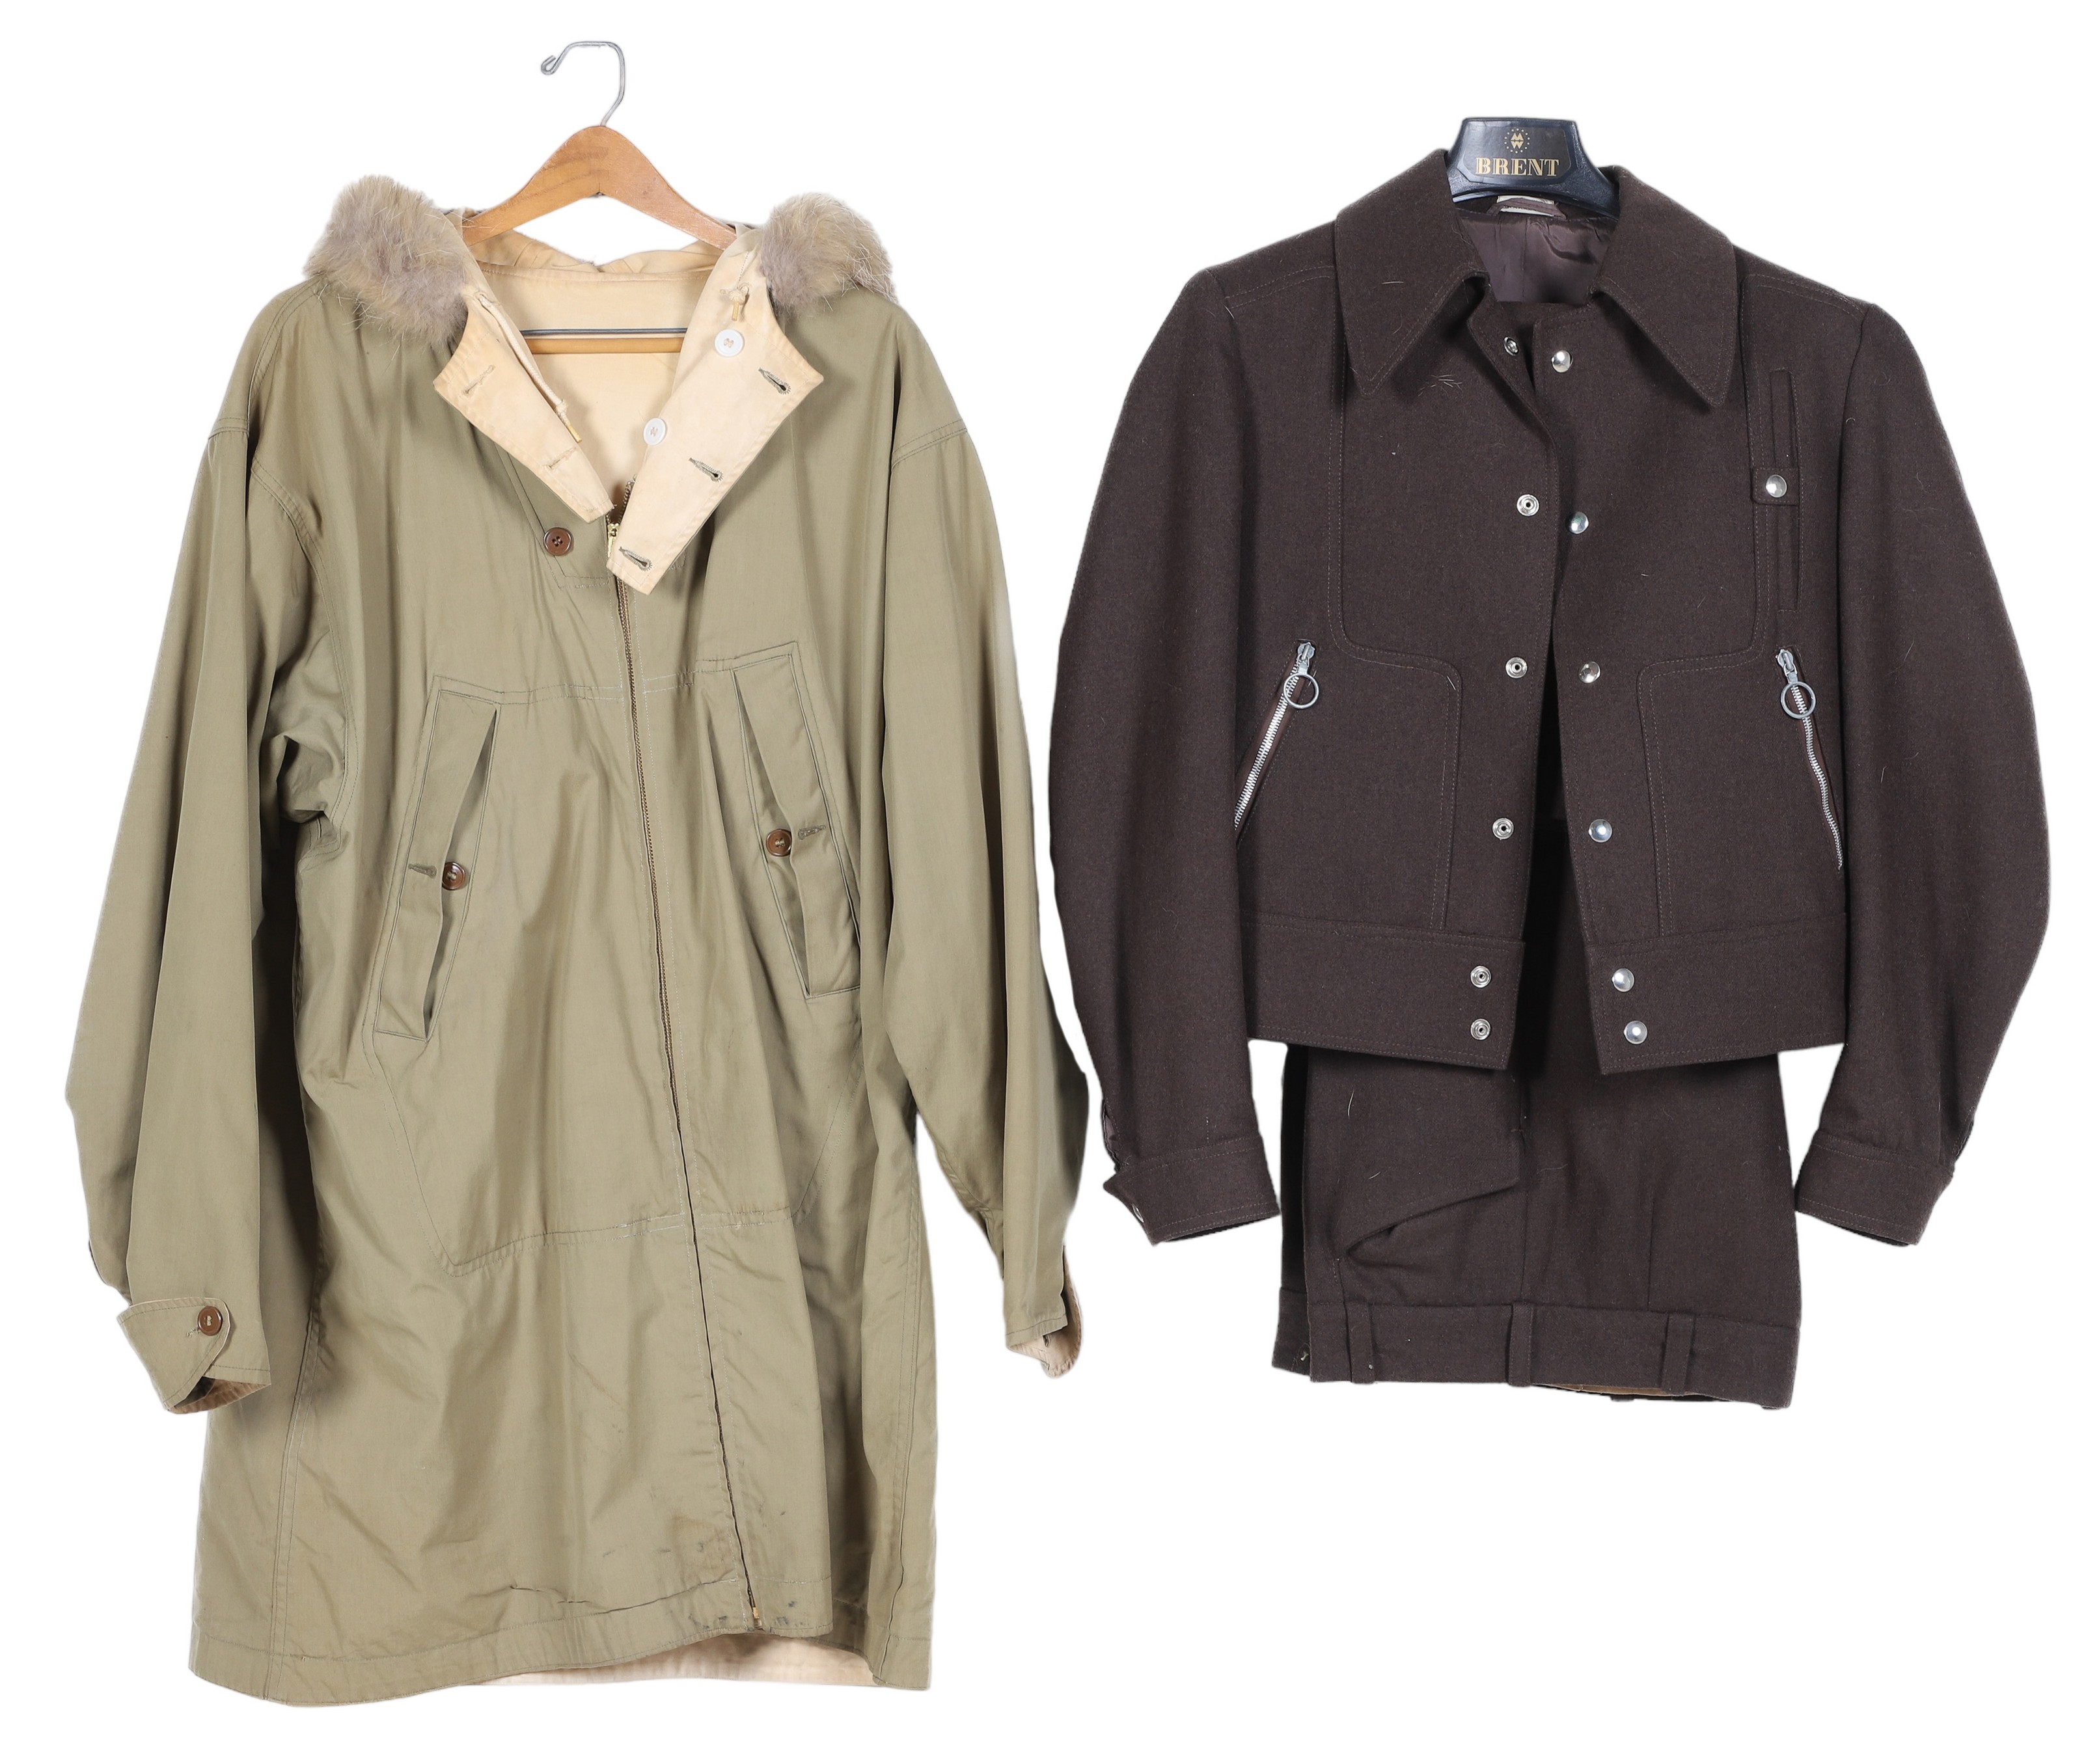 Military parka and wool suit to 2e11f9